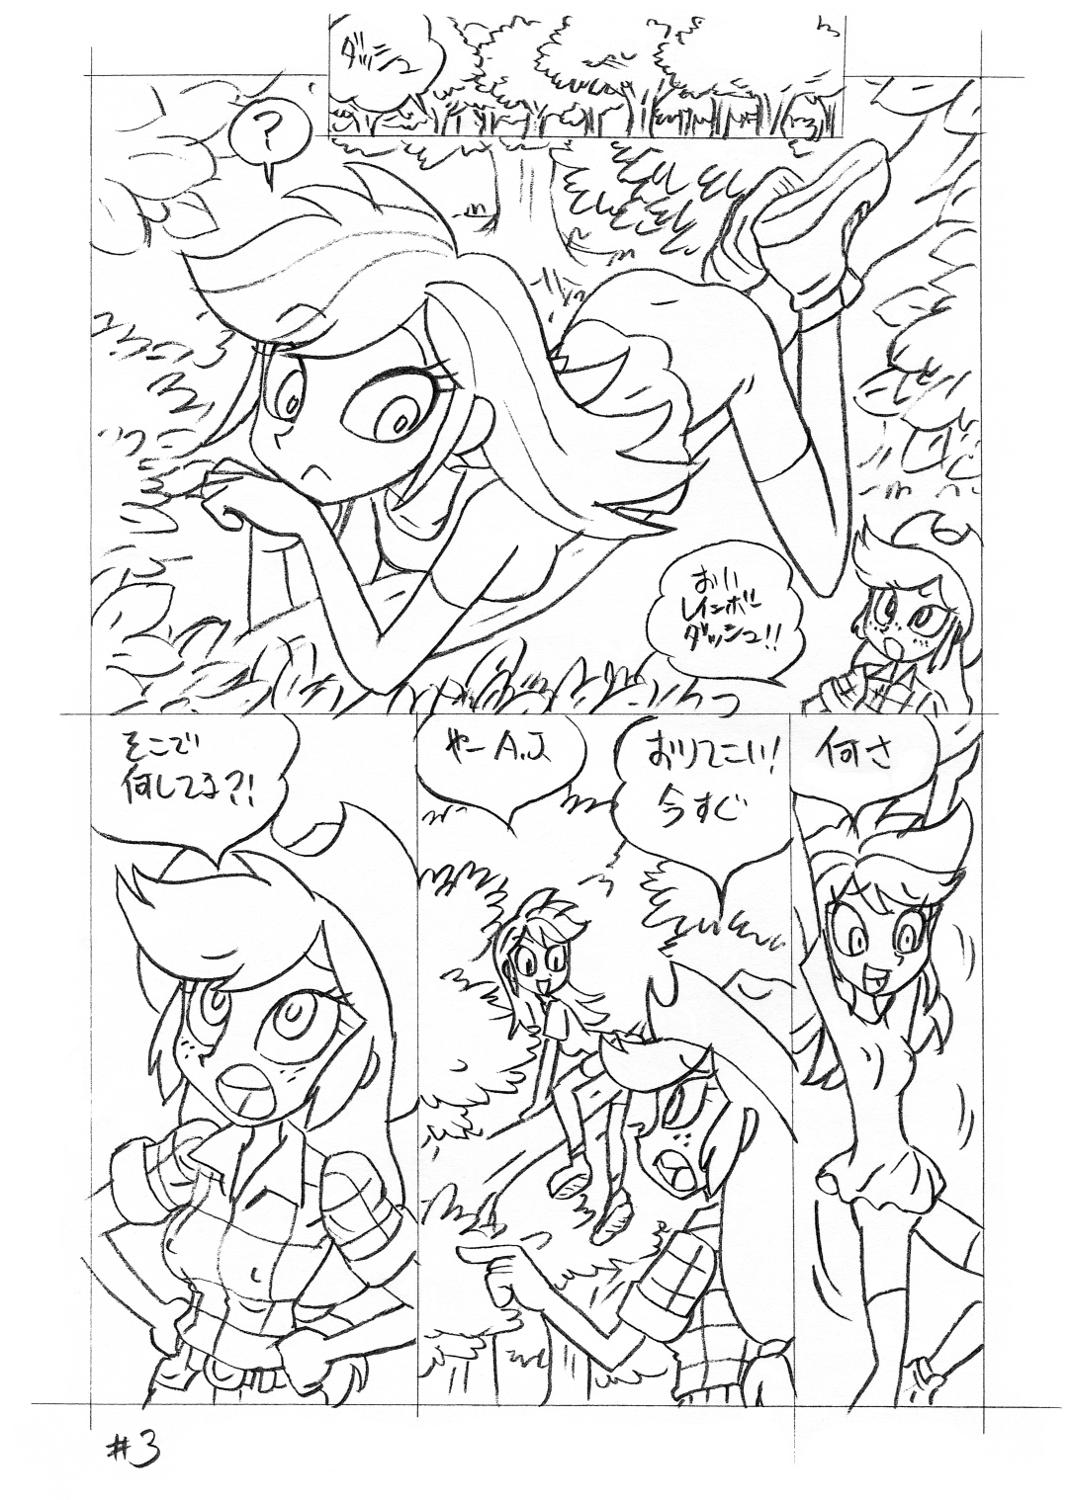 Gay Medical Psychosomatic Counterfeit EX- A.J. in E.G. Style - My little pony friendship is magic Rough Sex - Page 2